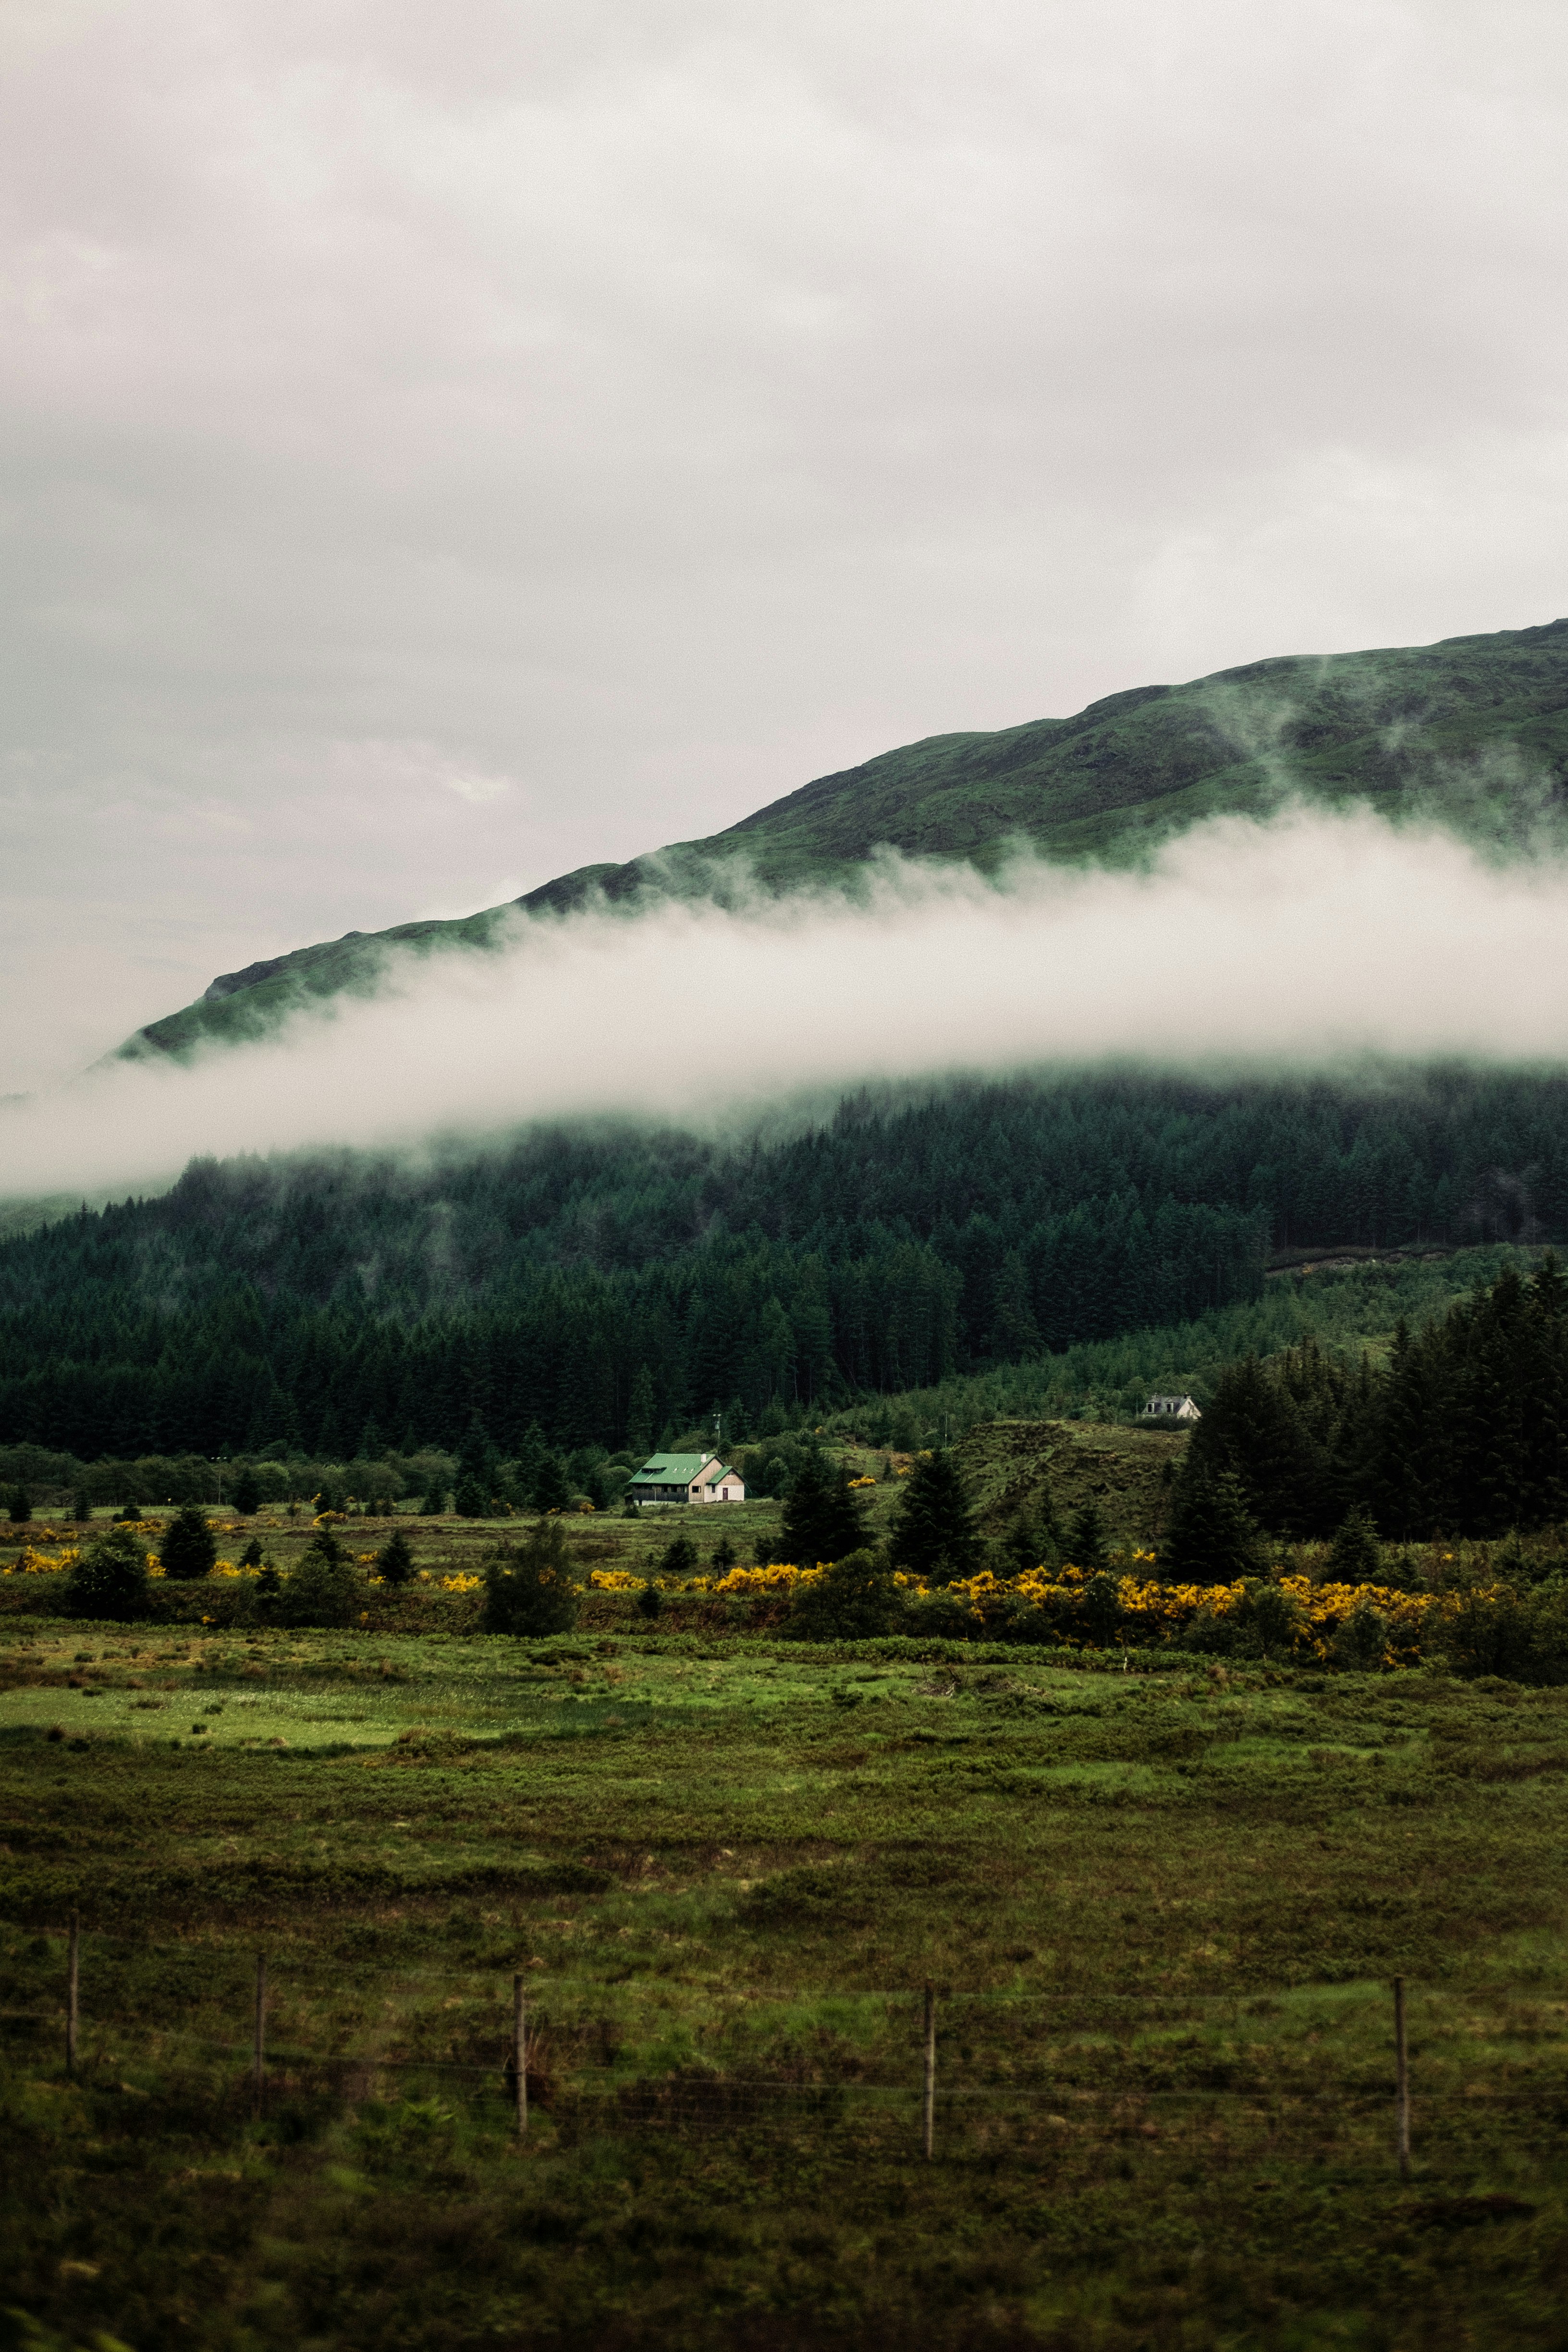 Travelling up north to Fort William for the mountain biking downhill World Cup. It was early, the roads were clear and the weather was patchy and wet every so often. The low cloud produced some beautiful views from the car, the small cabins every so often gave us a real sense of scale with our surroundings. Like so…